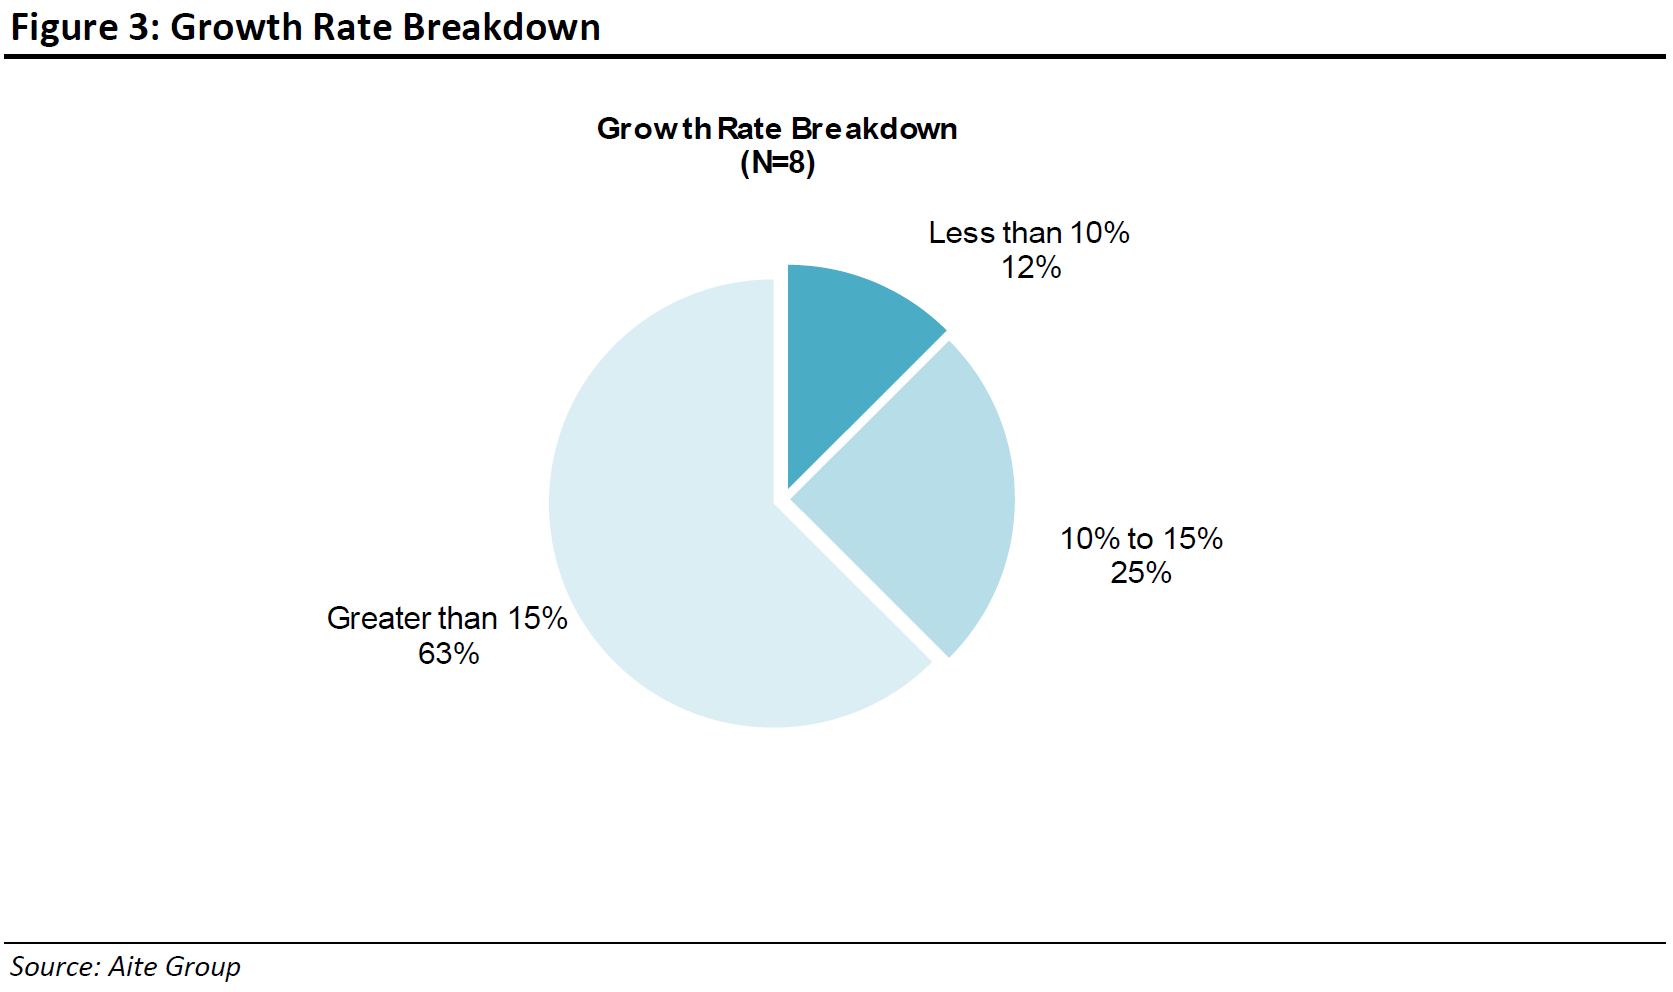 Aite Evaluation Report - Figure 3: Growth Rate Breakdown